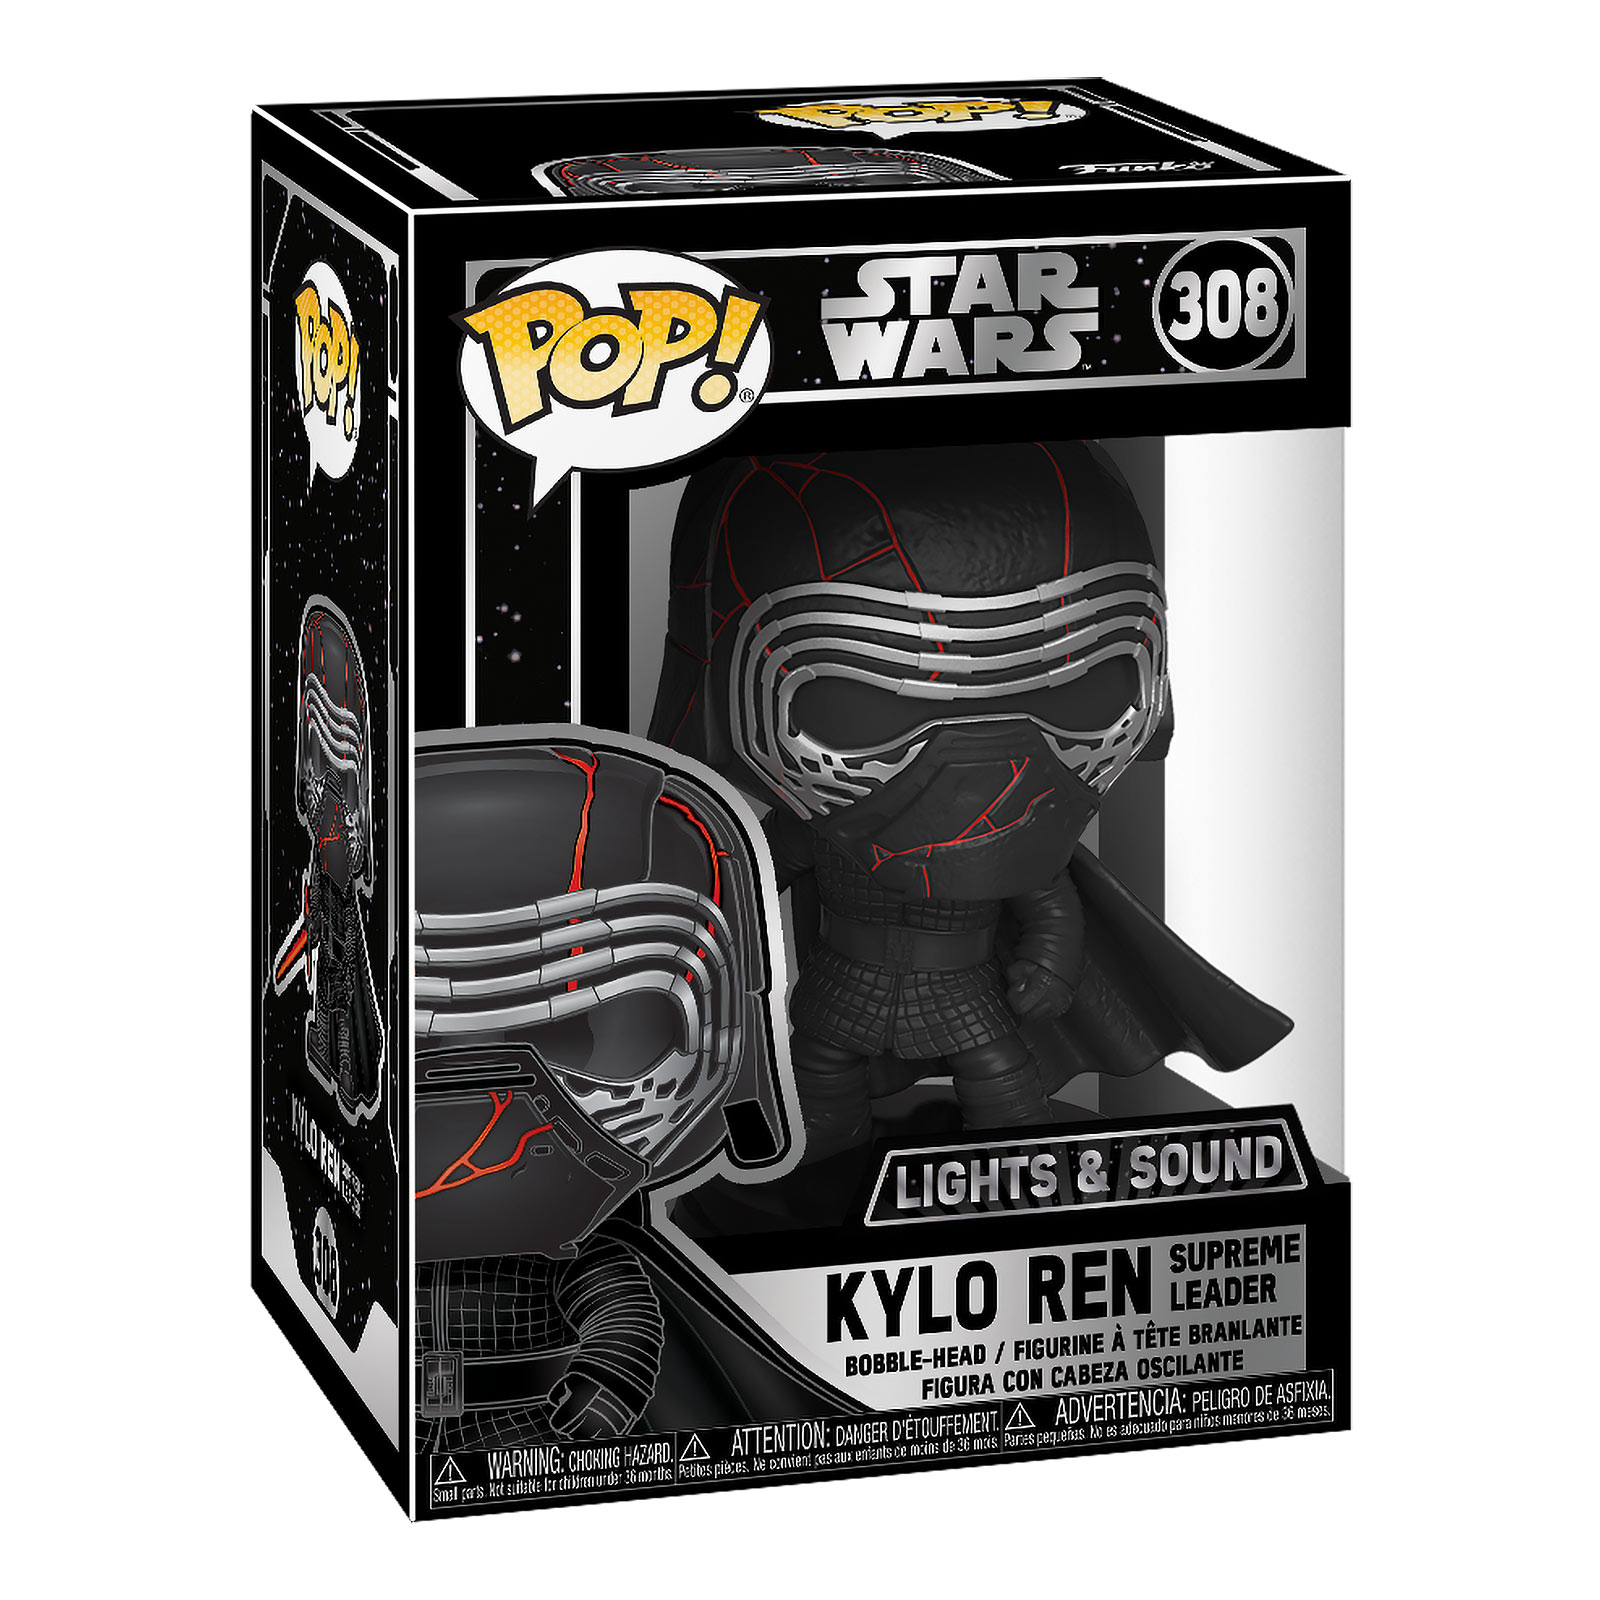 Star Wars - Kylo Ren Funko Pop bobblehead figure with light and sound